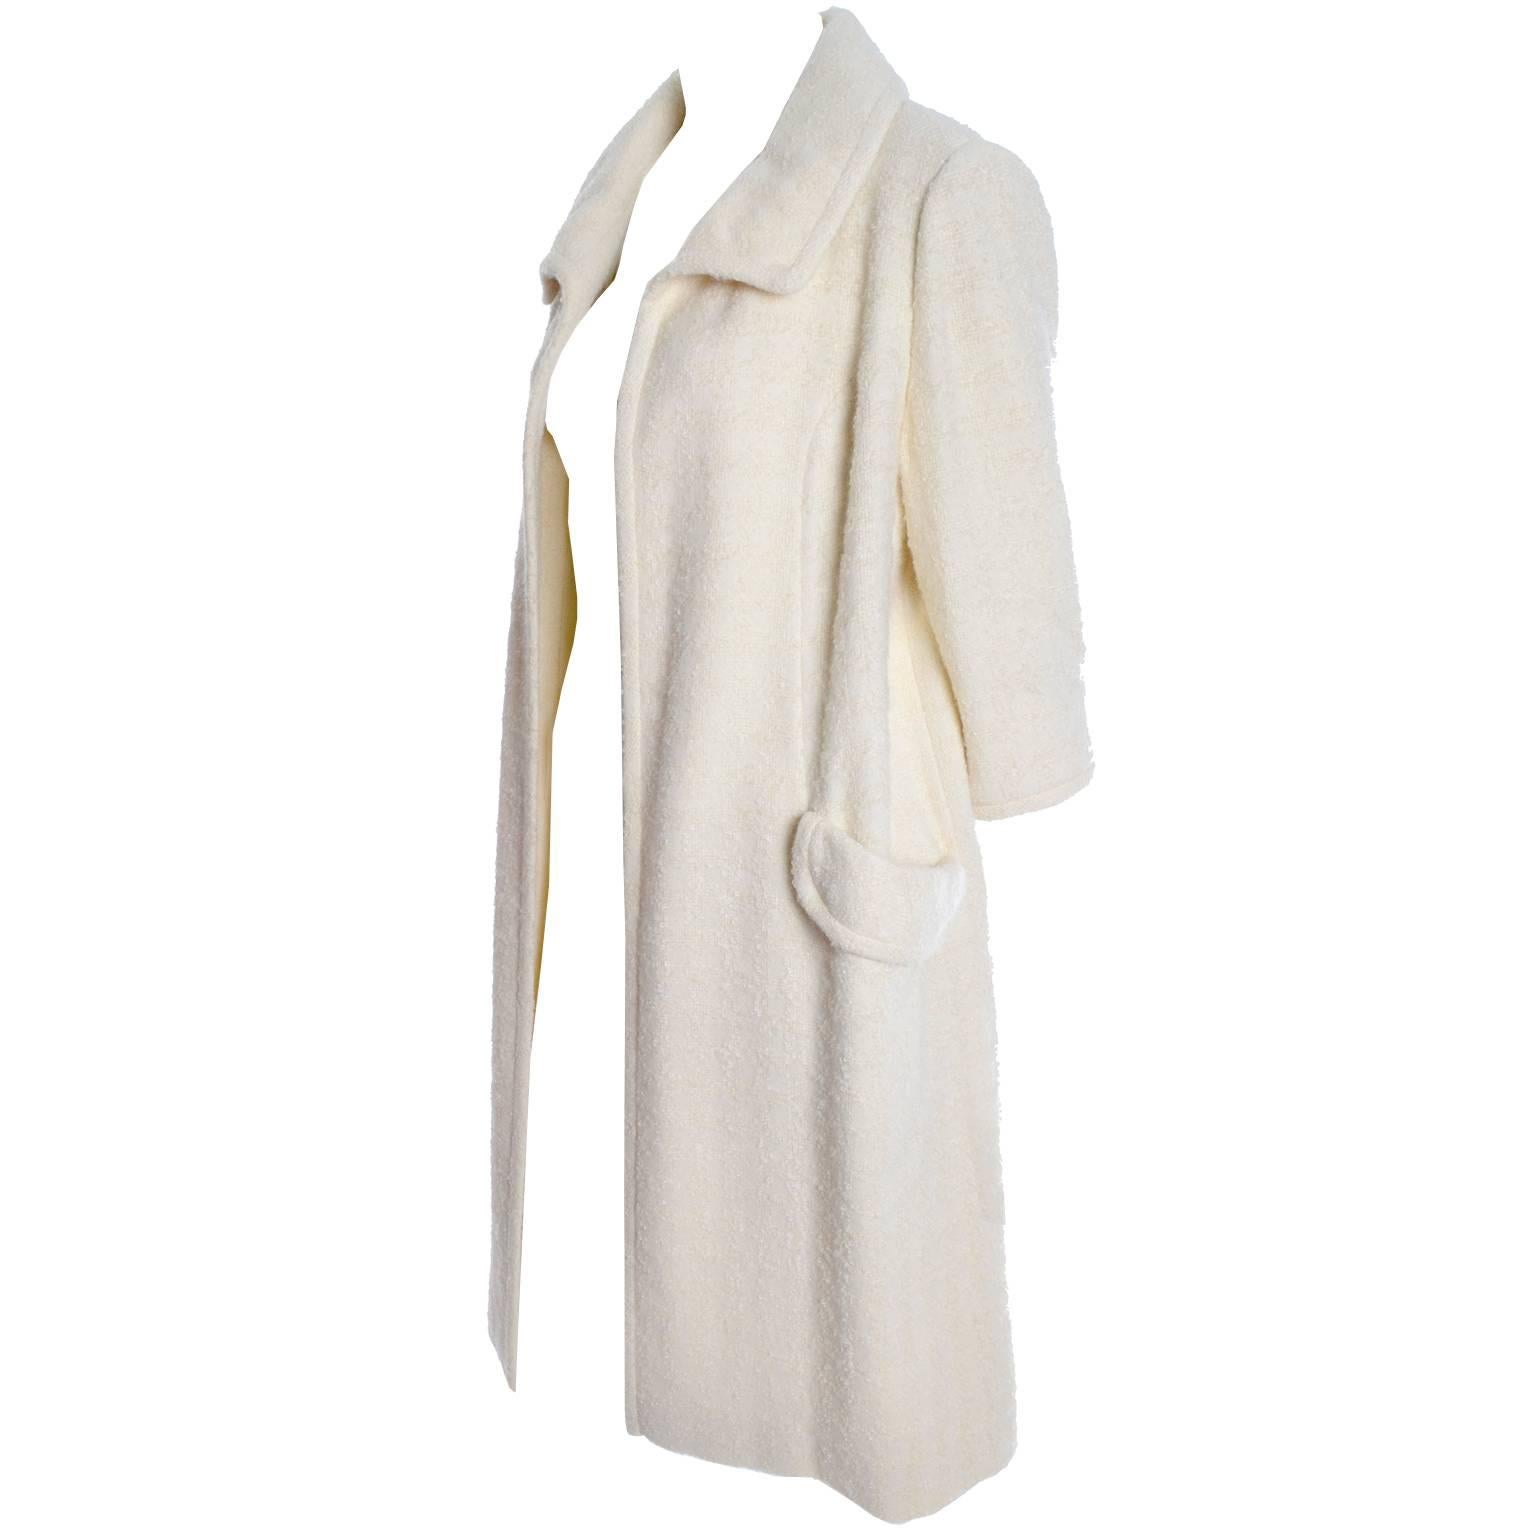 This 1960's vintage coat came from an estate I handled years ago that was like a who's who of American mid century designers.  Everything she owned was not only spectacular, it was is pristine condition.  This coat was one of hers and it is a creamy